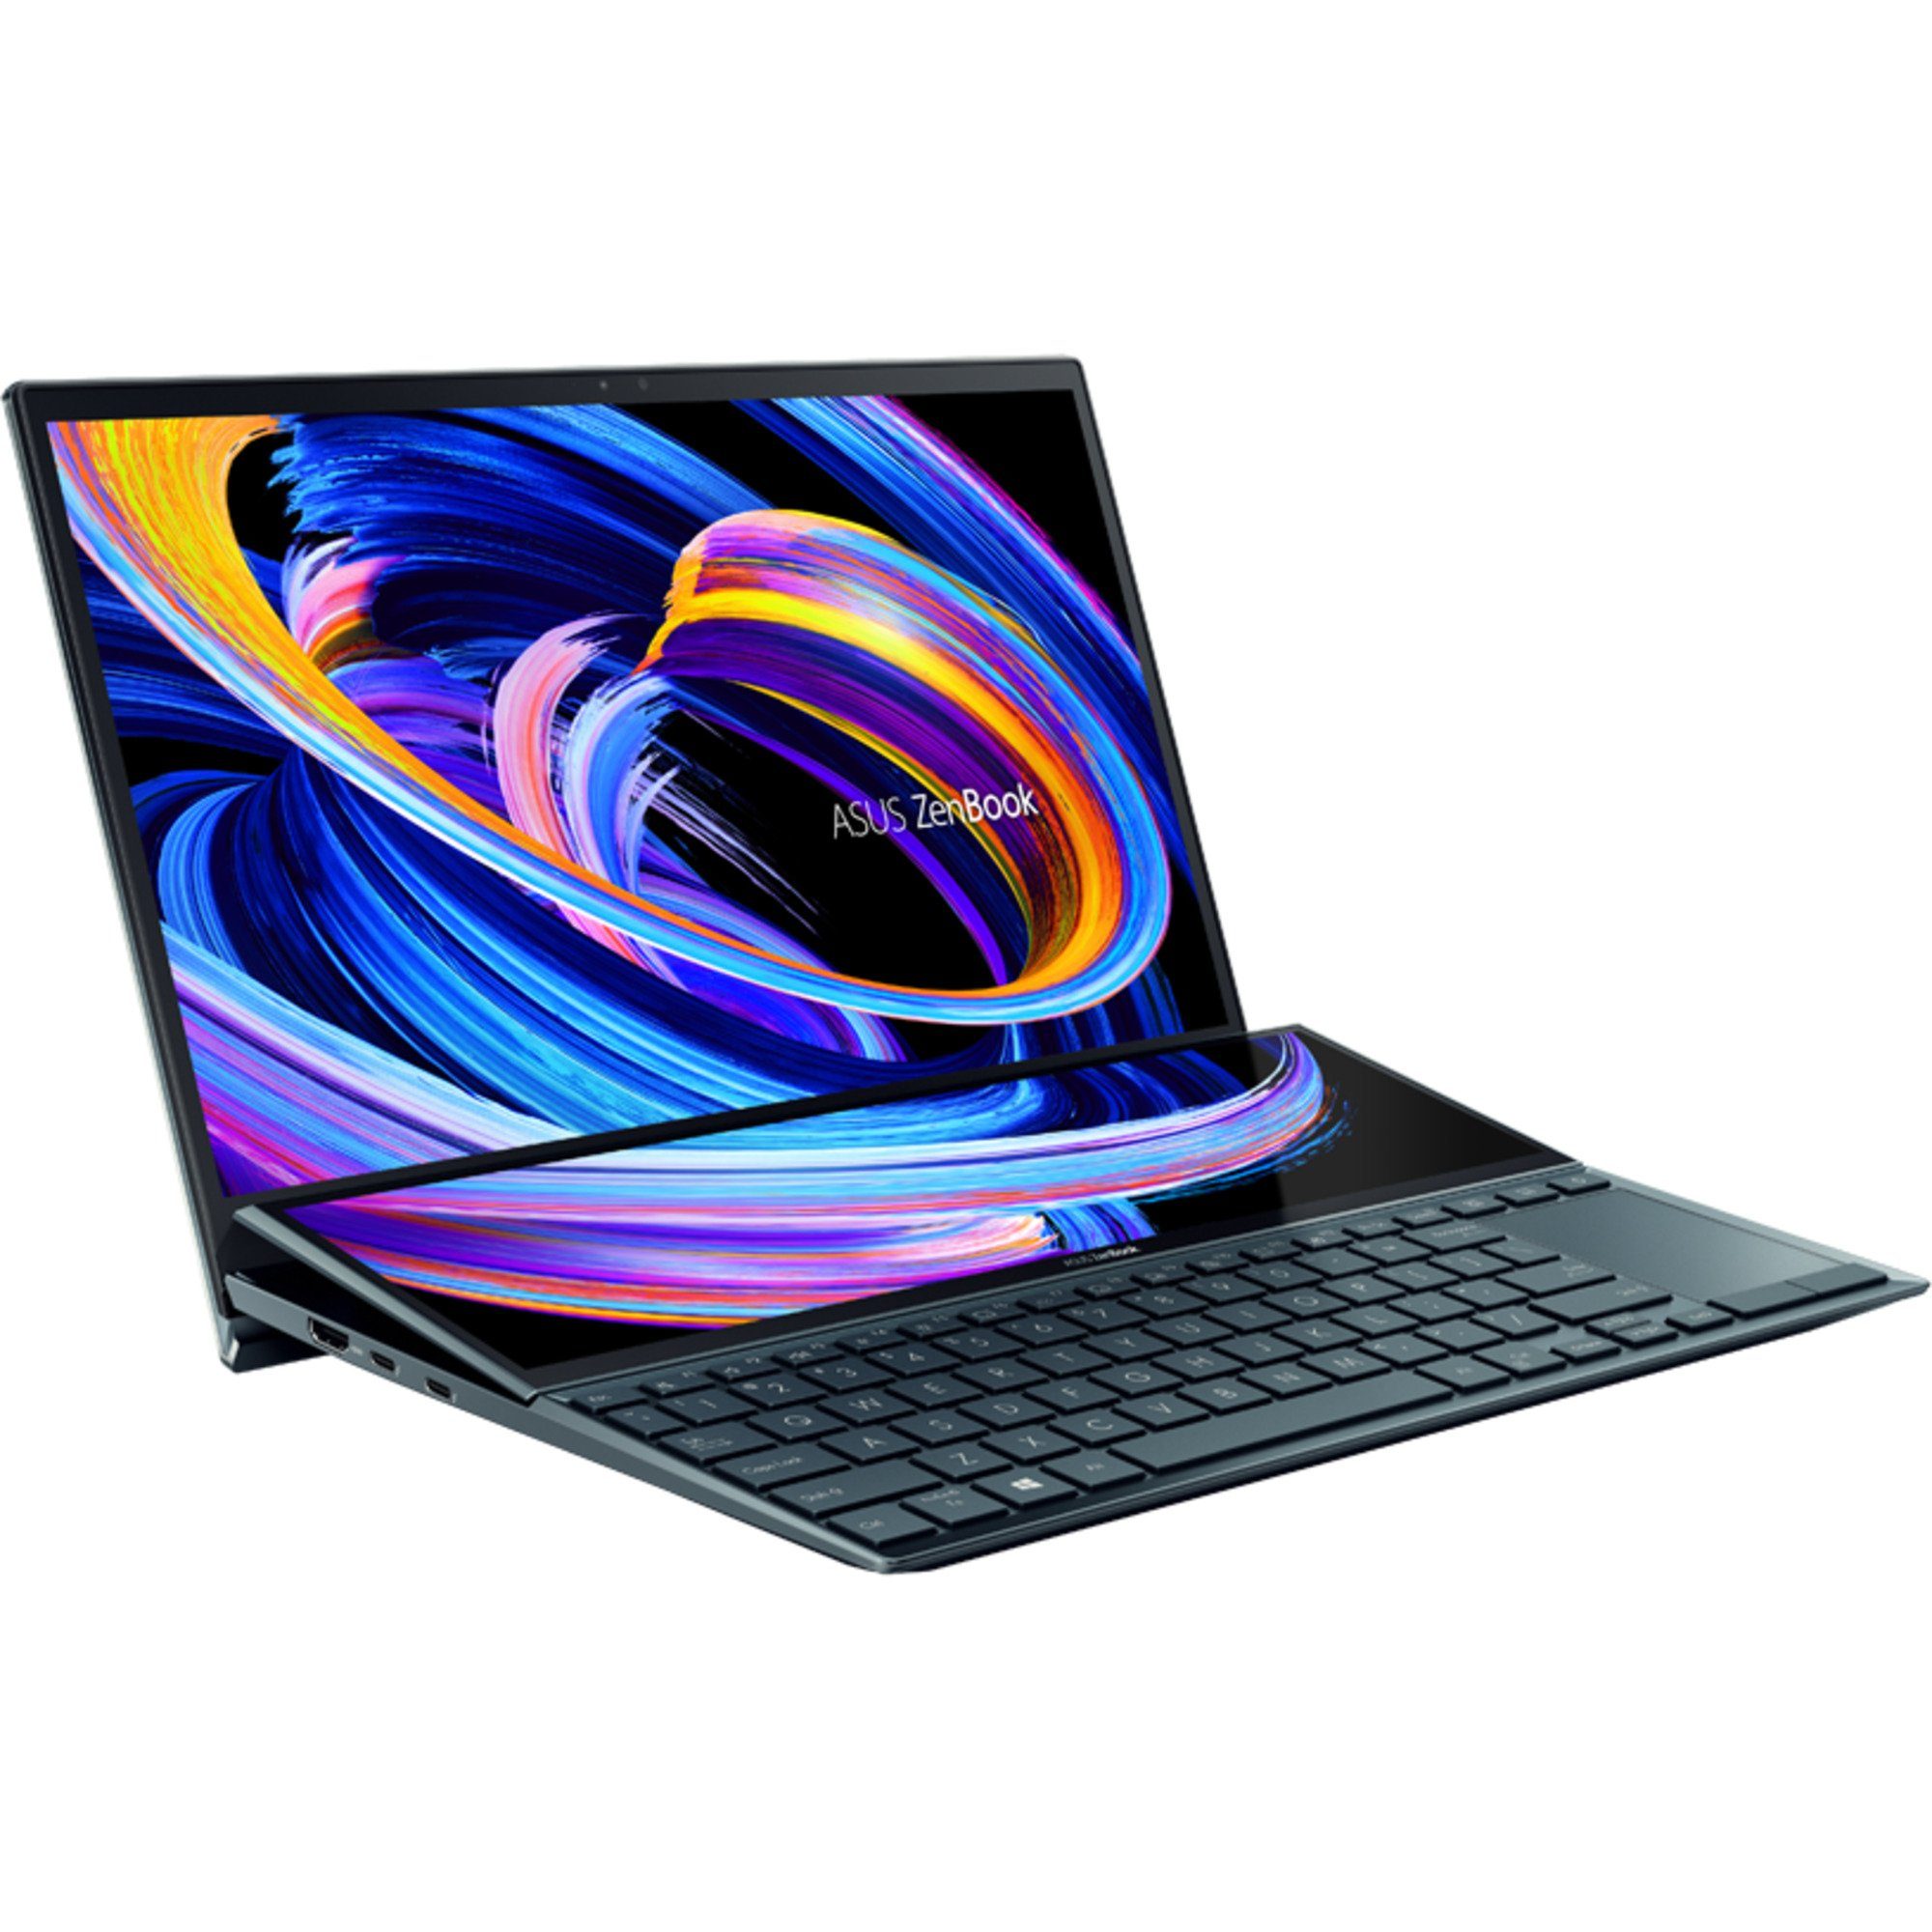 Asus ZenBook Pro Duo (UX482EA-HY034T) Notebook | OTTO